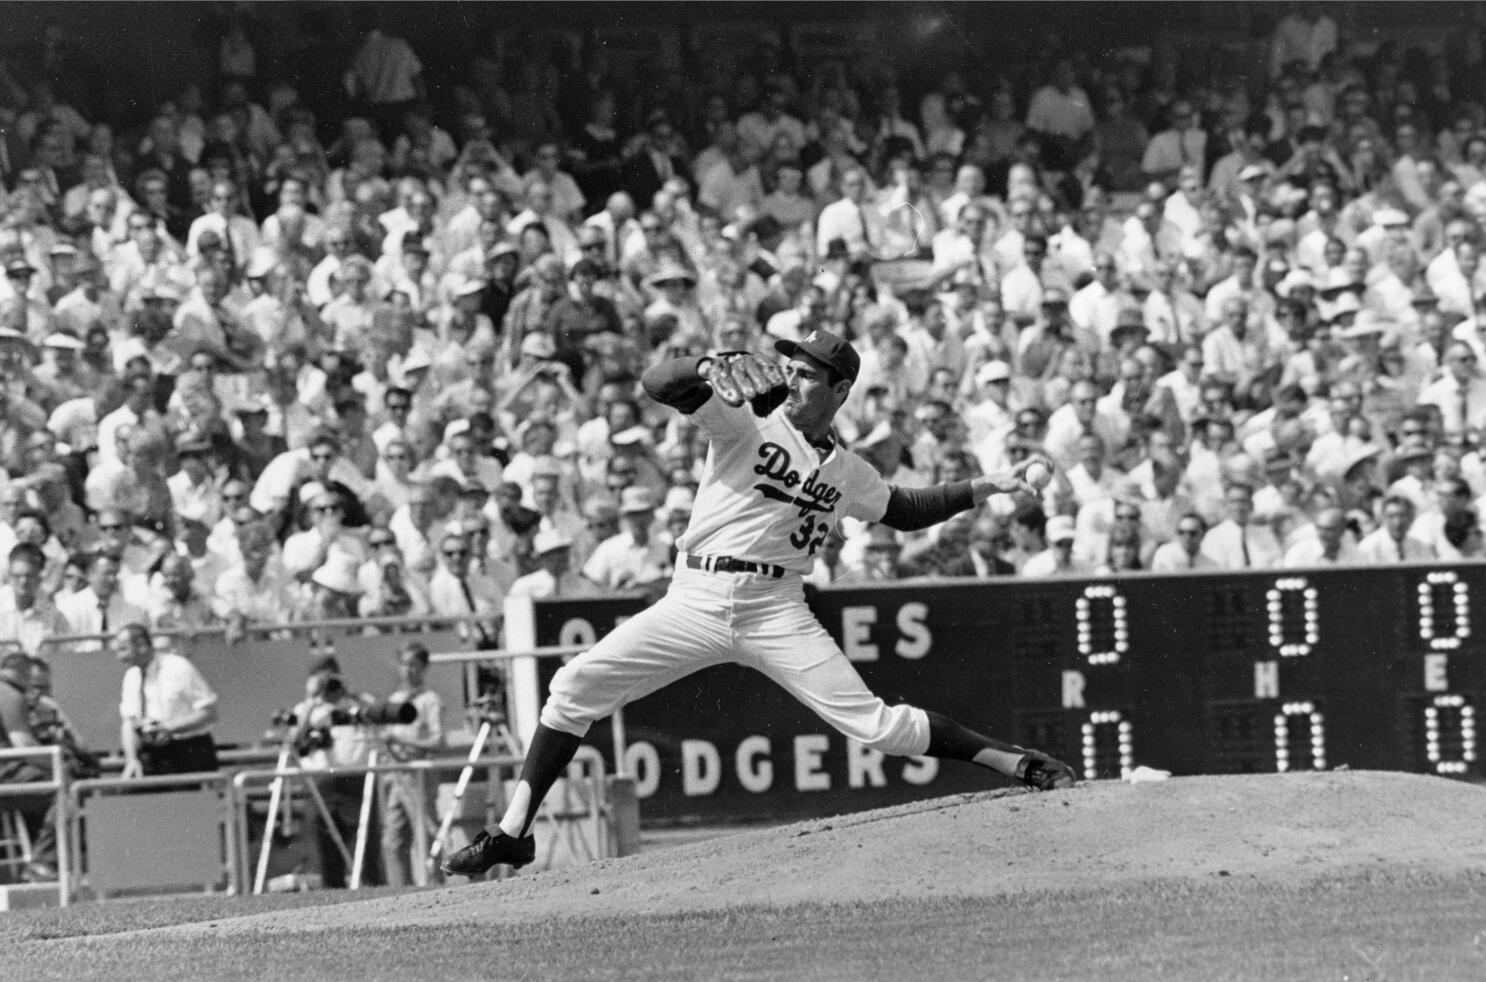 This Day In Dodgers History: Roy Campanella, Sandy Koufax And